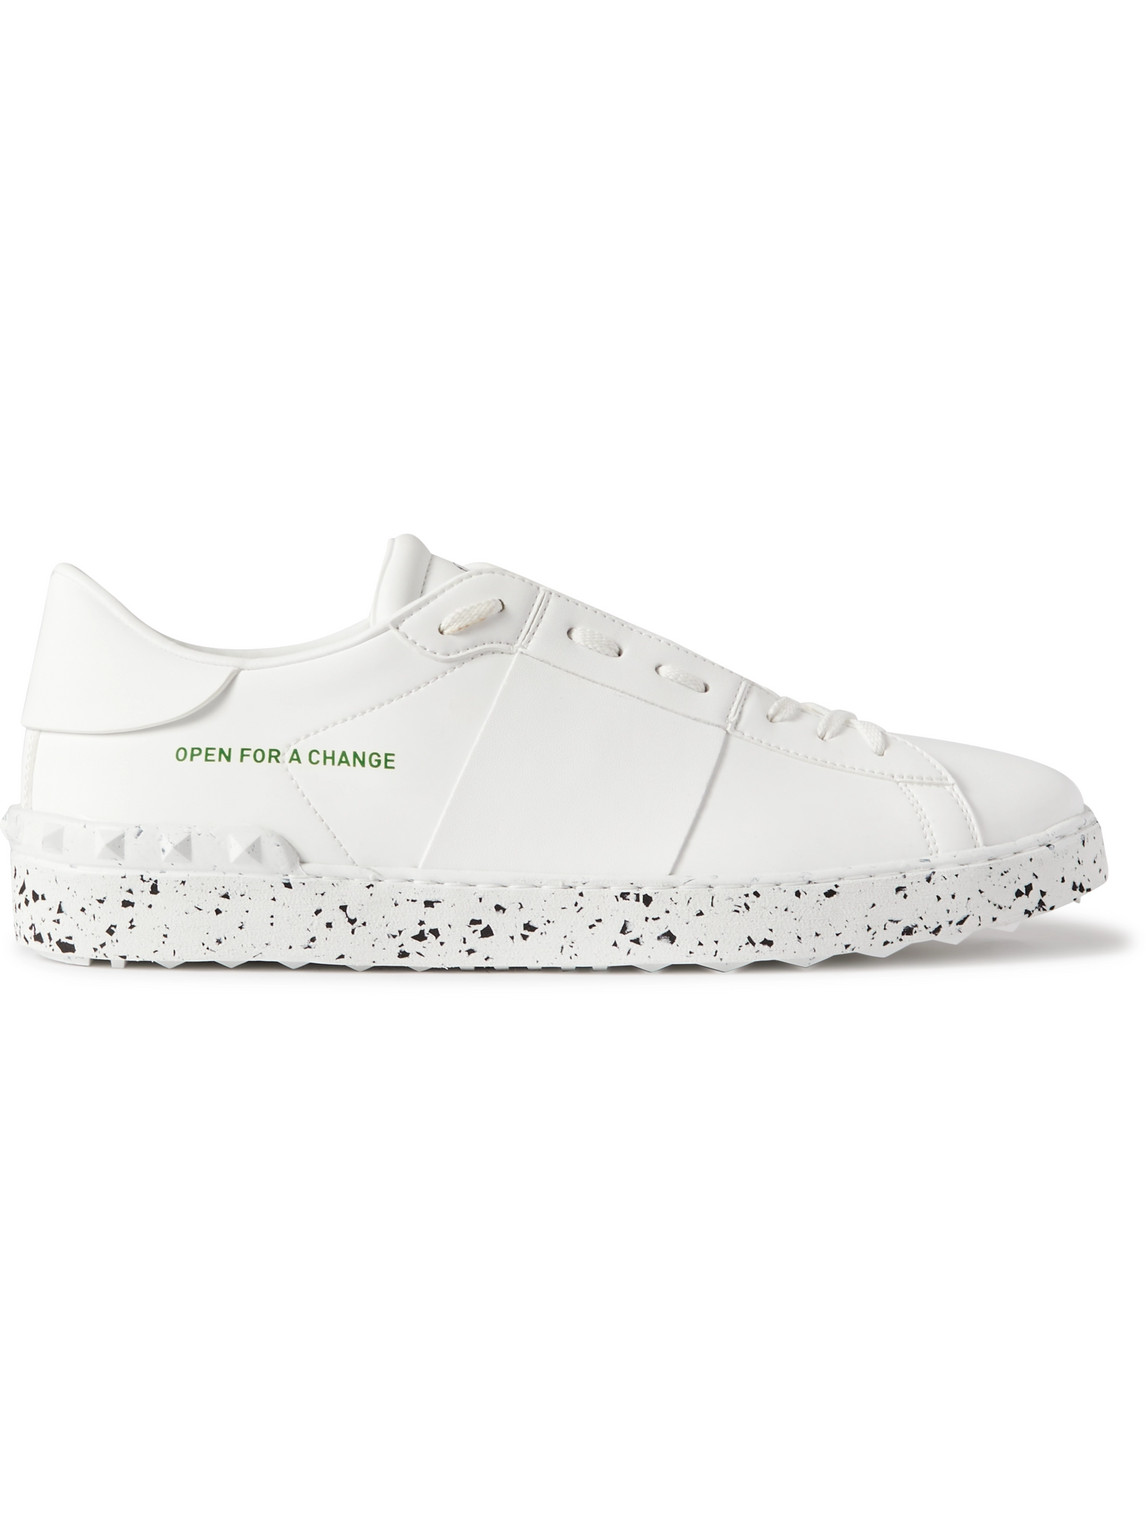 Valentino Garavani Open for a Change Printed Faux Leather Sneakers